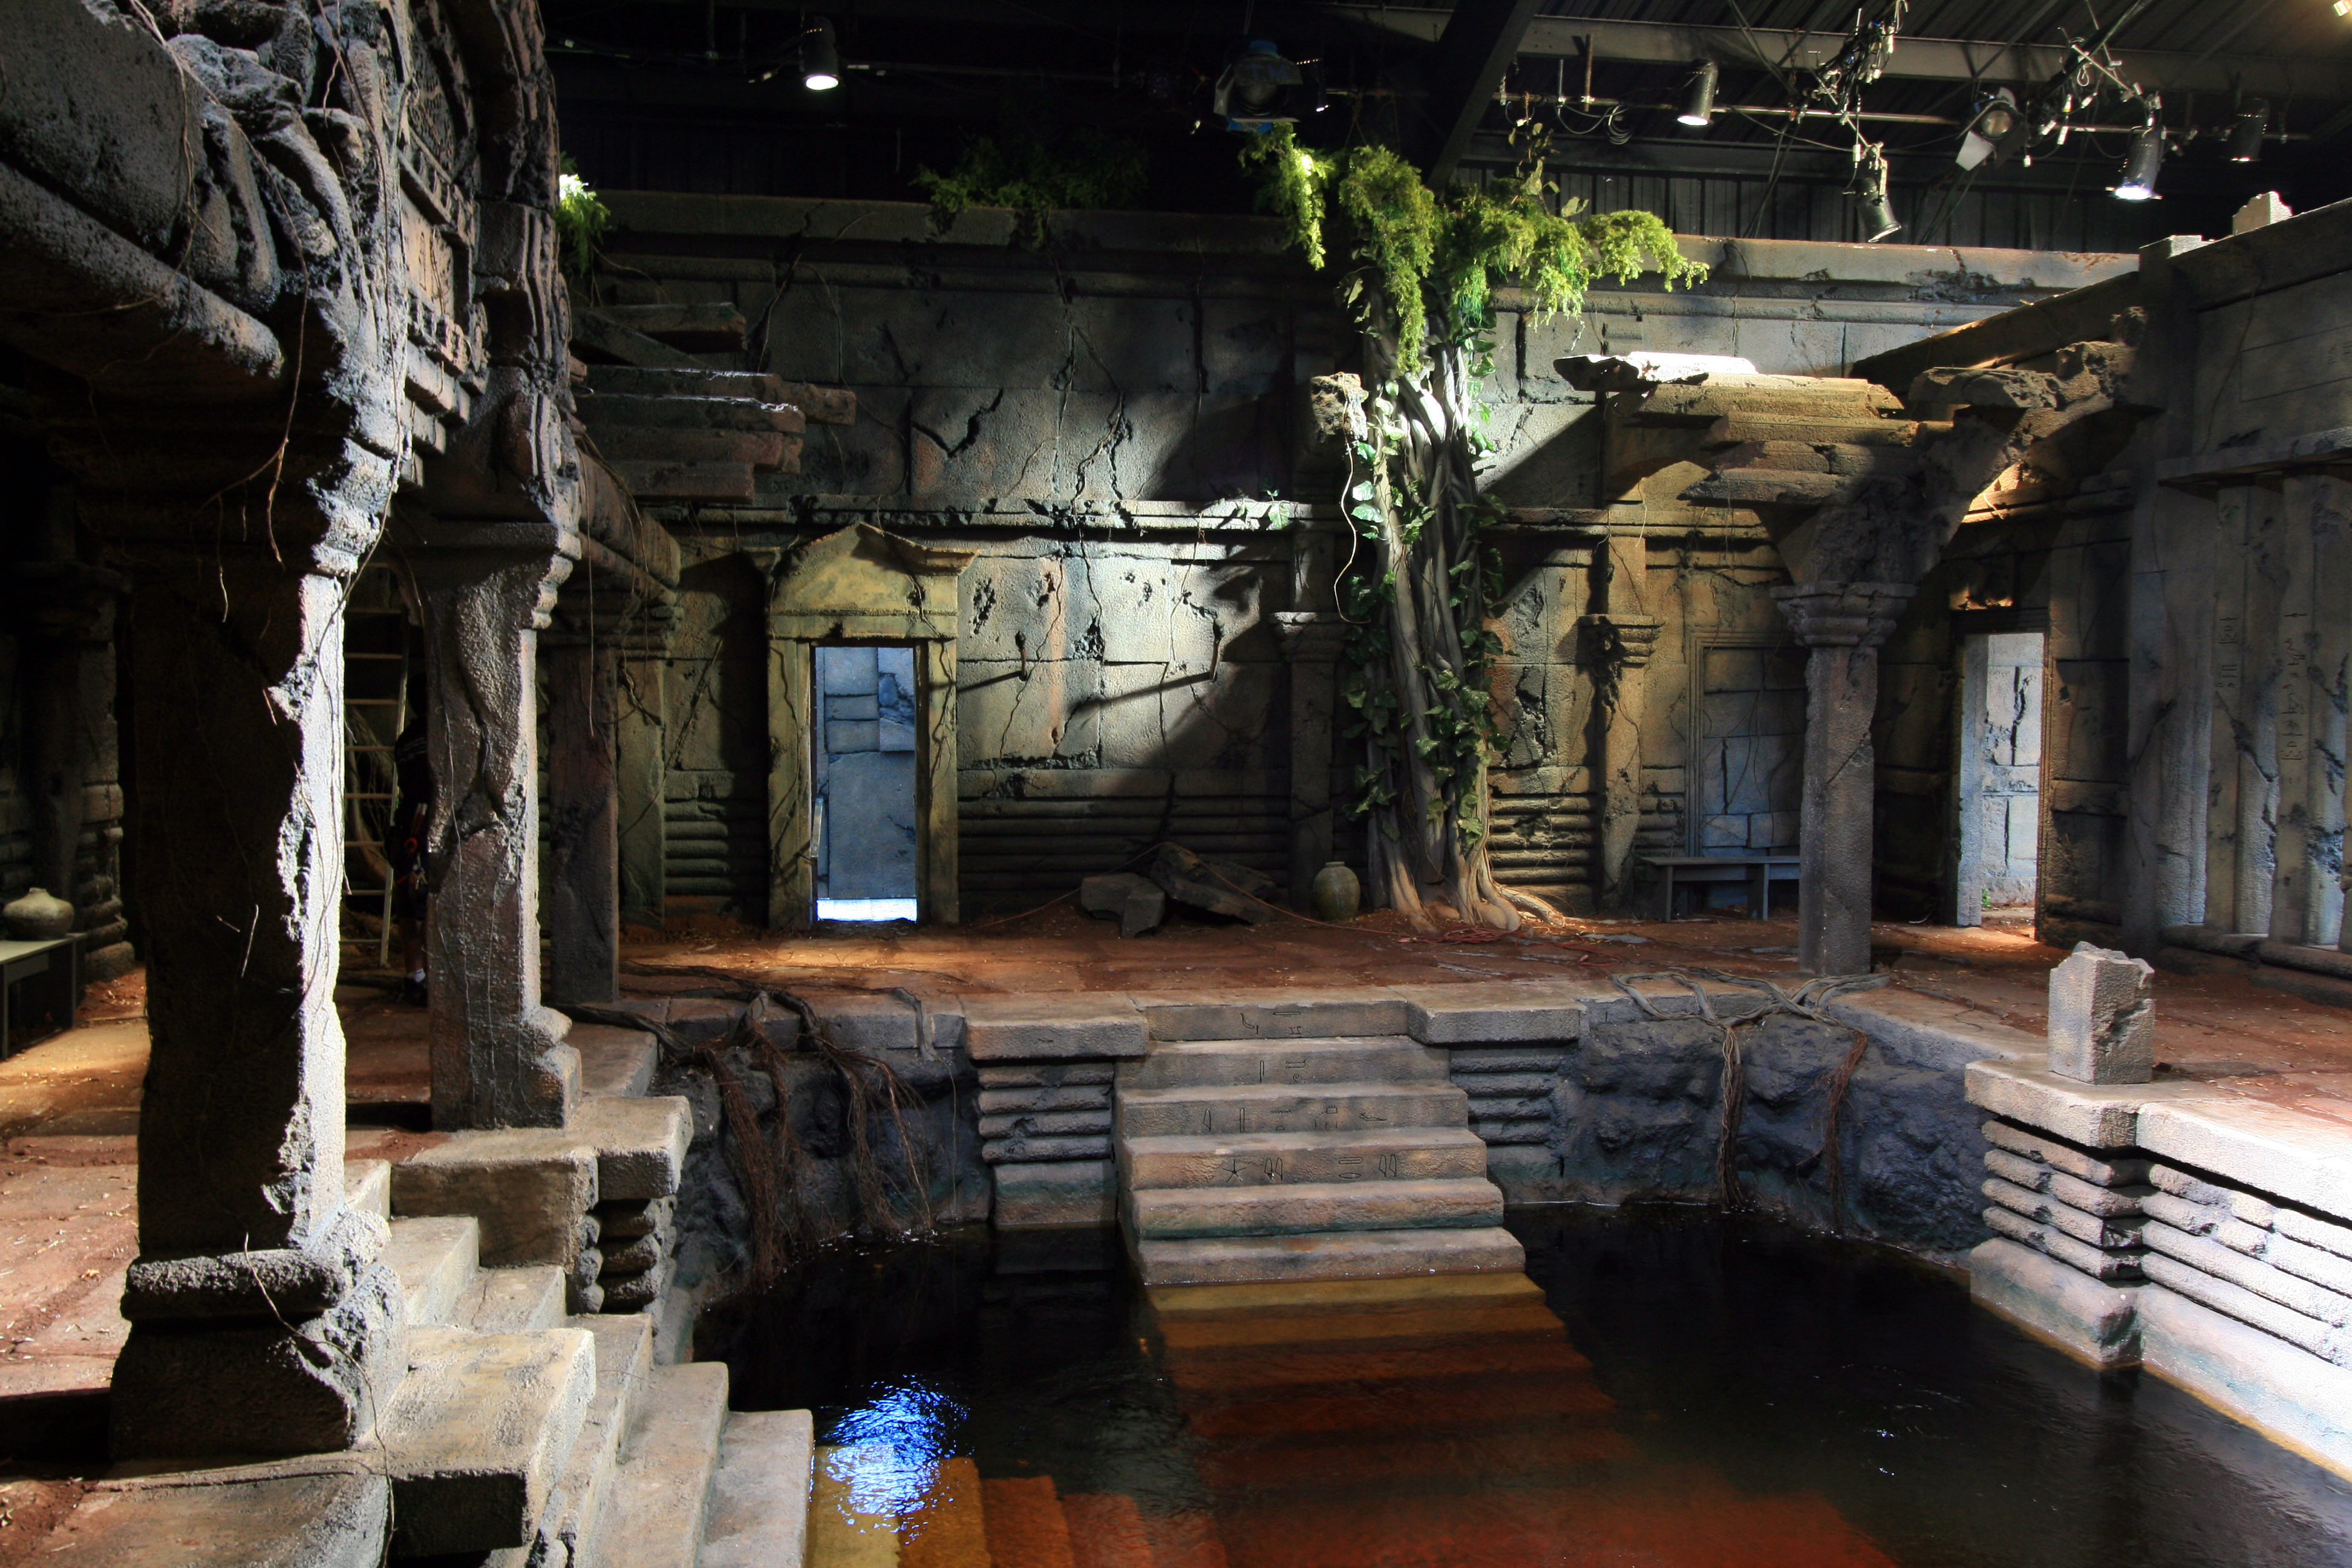 Temple interior with healing pool, built on stage for 